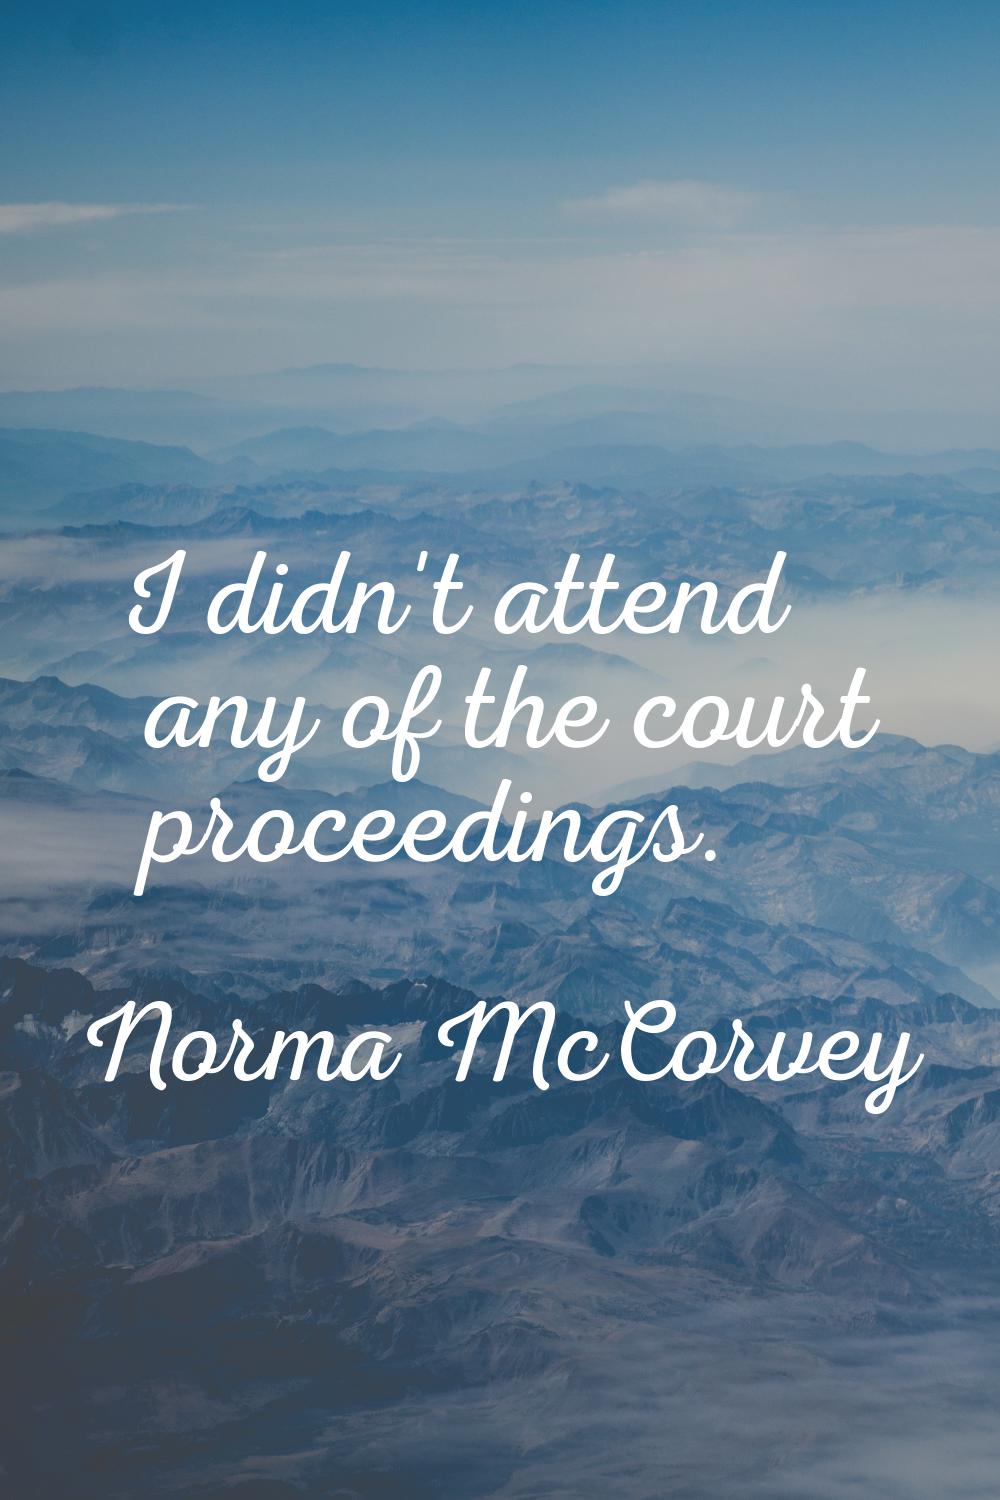 I didn't attend any of the court proceedings.